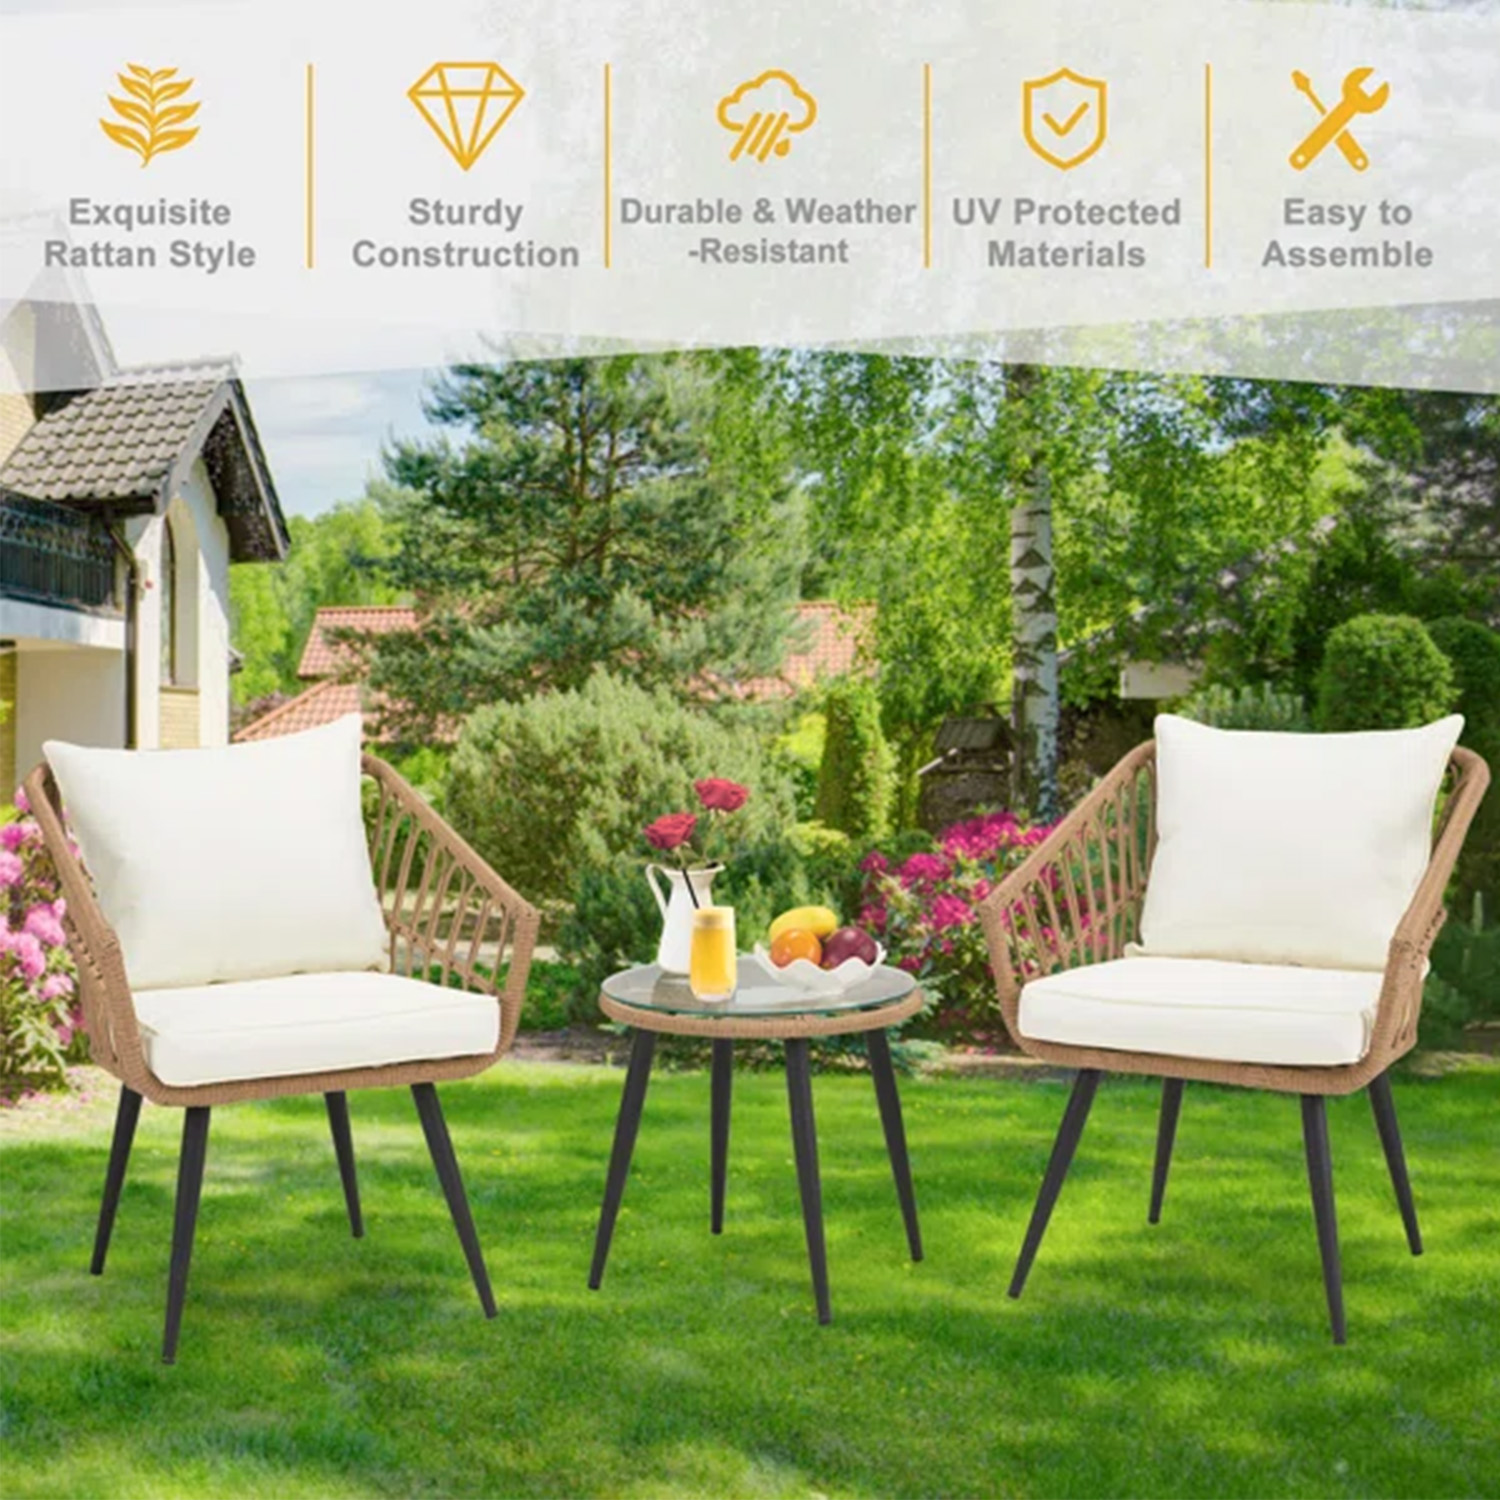 3 Pieces Patio Conversation Set Outdoor Furniture Wicker Rattan Chair with Cushions Bistro Sets Glass Top Coffee Side Table Seating Sectional Garden Balcony Backyard Poolside Sunroom Boho - image 1 of 7